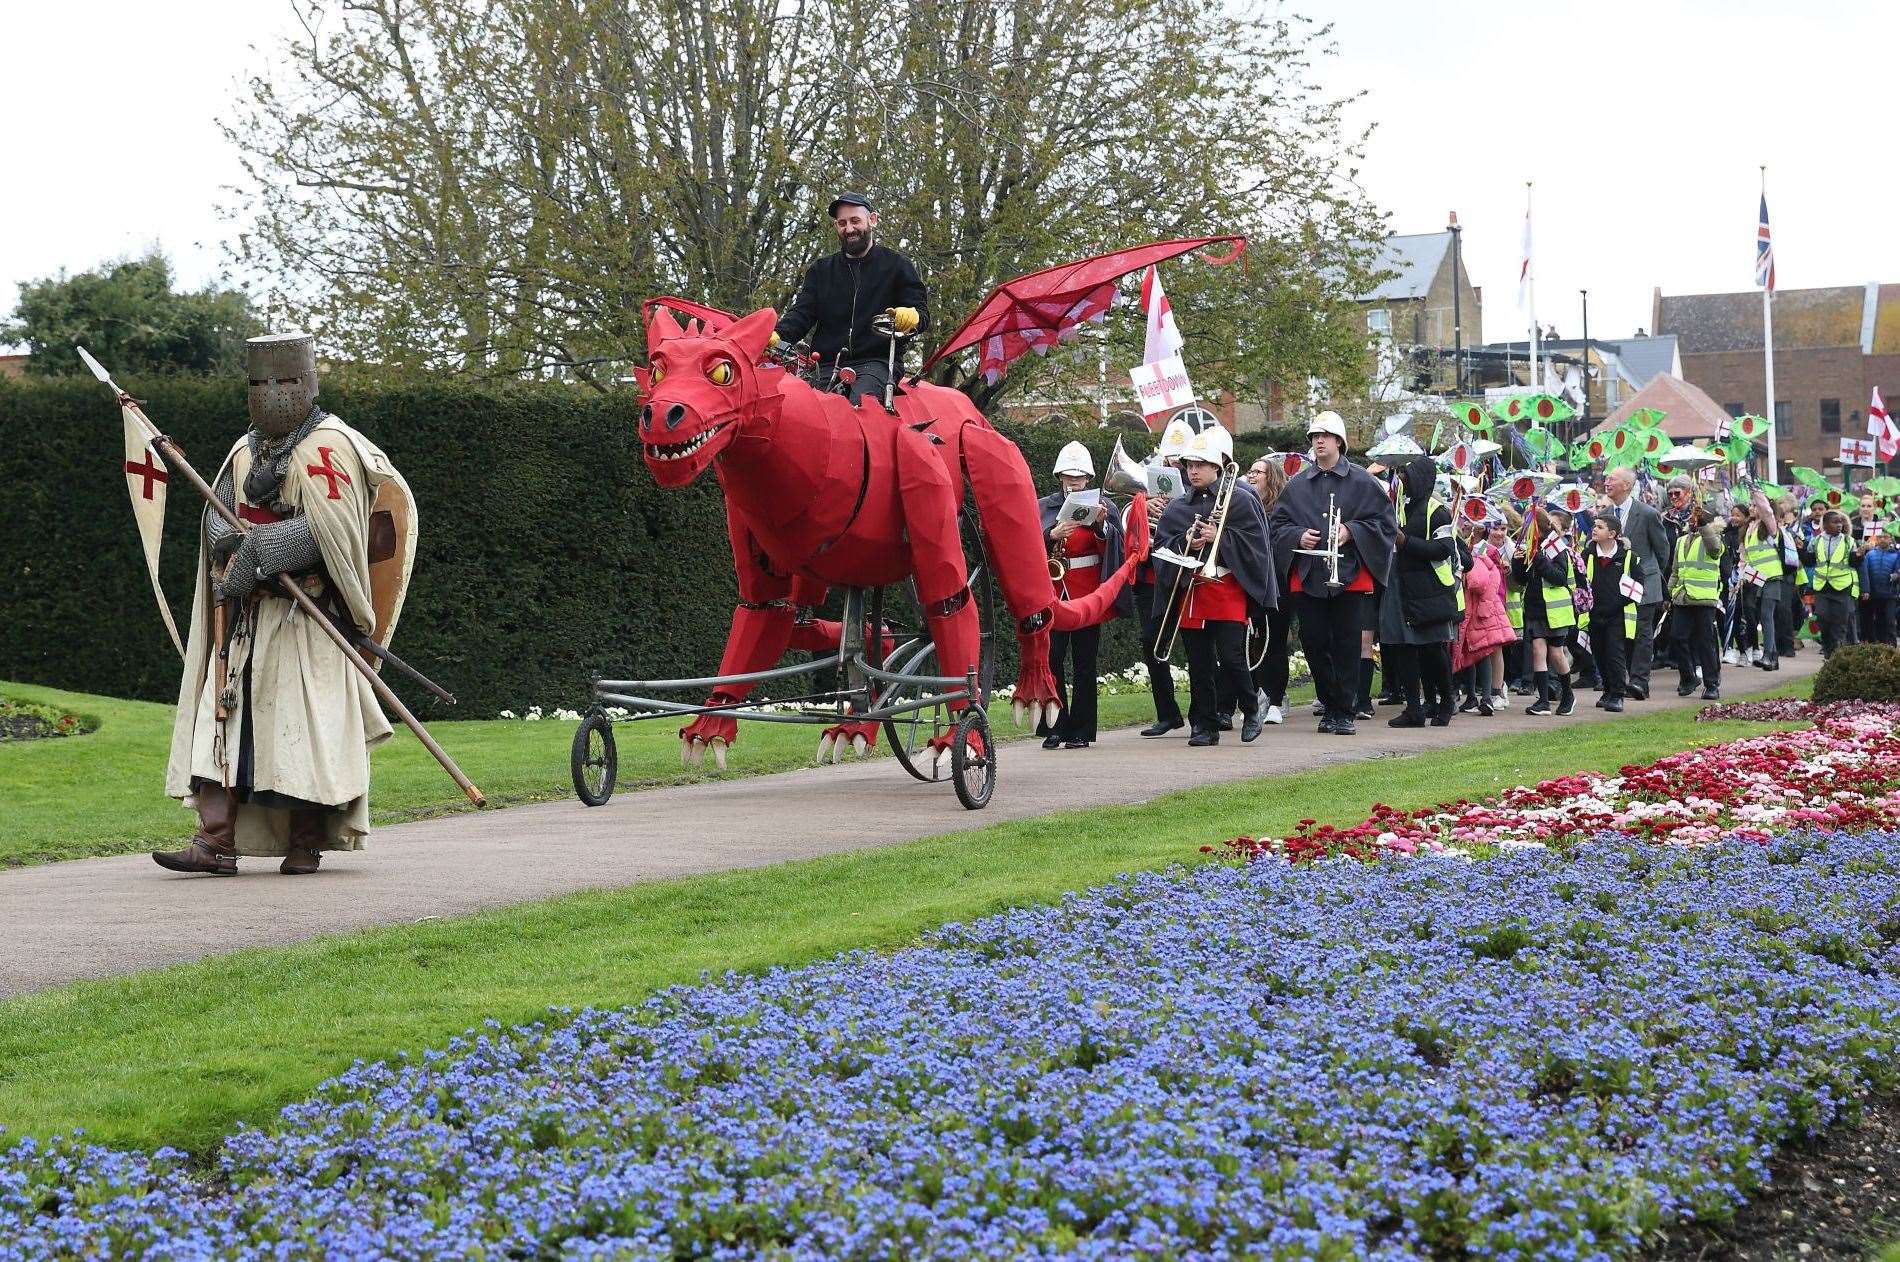 St George and an enormous dragon lead the procession through Dartford at the end of last weekPicture: Cohesion Plus